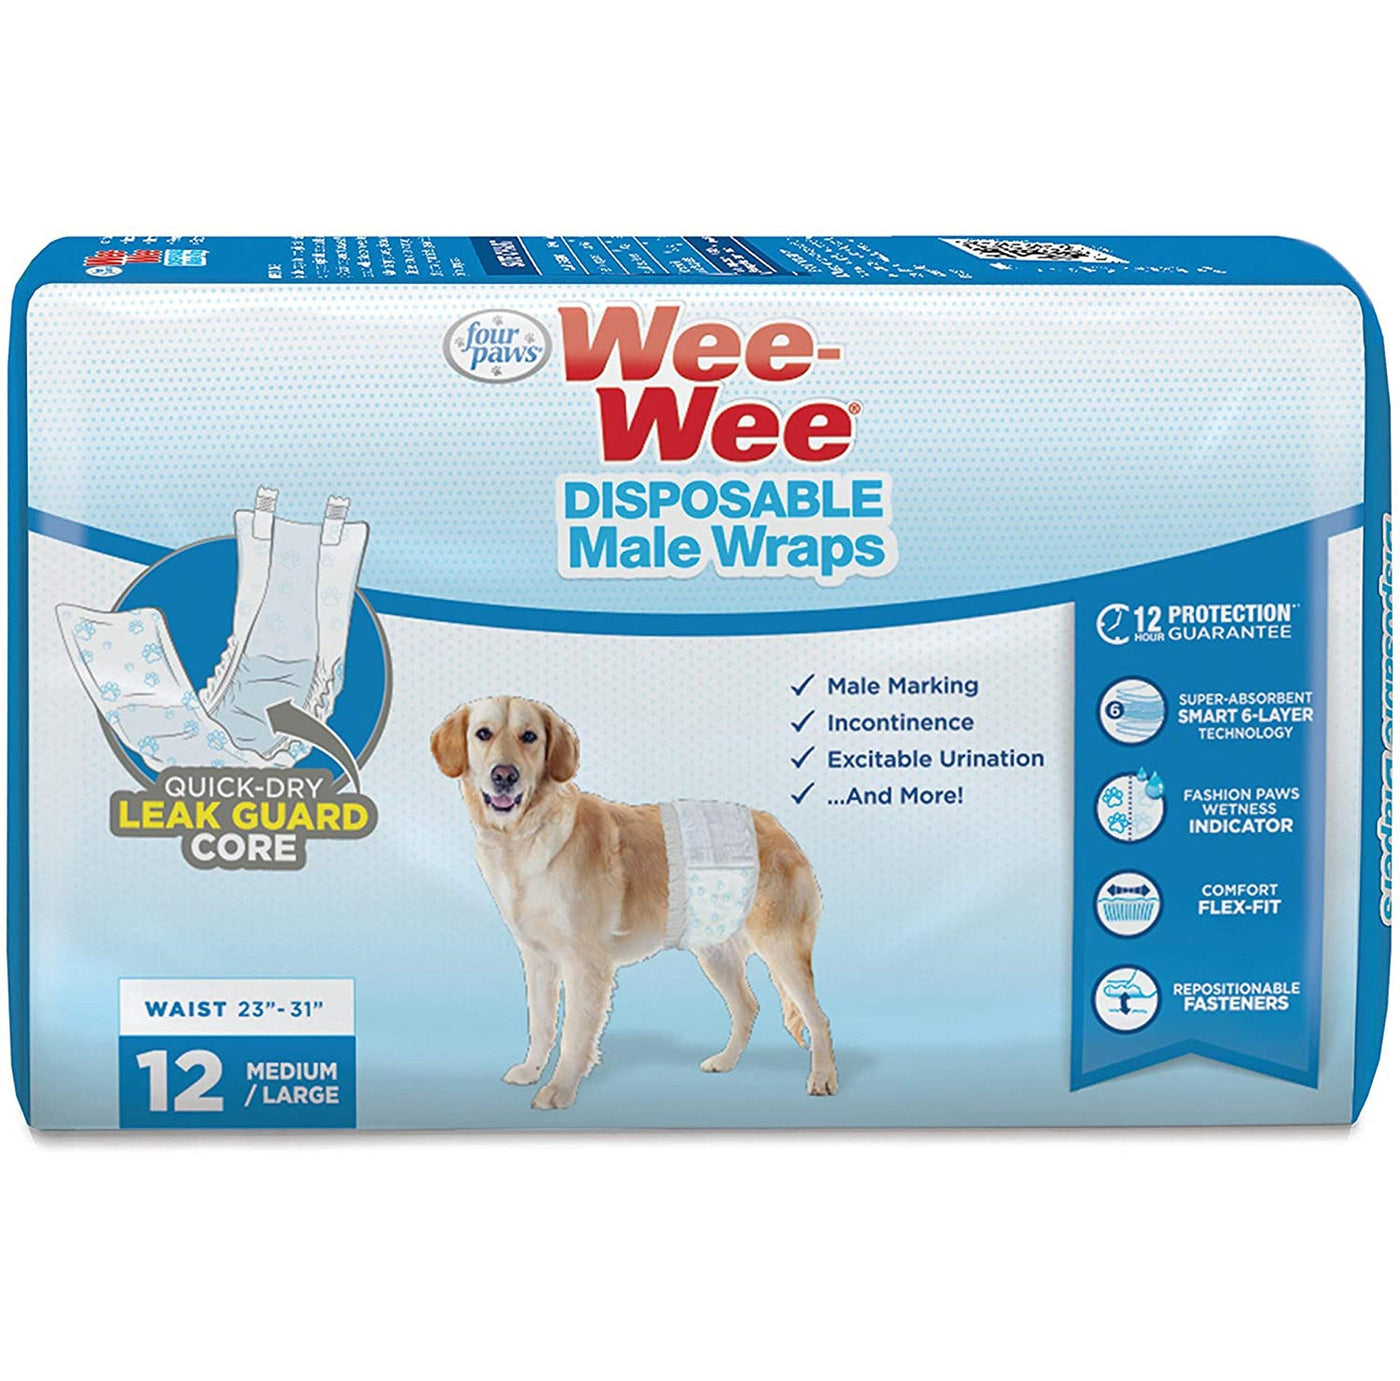 Four Paws Wee-Wee Disposable Male Dog Wraps 12 Count